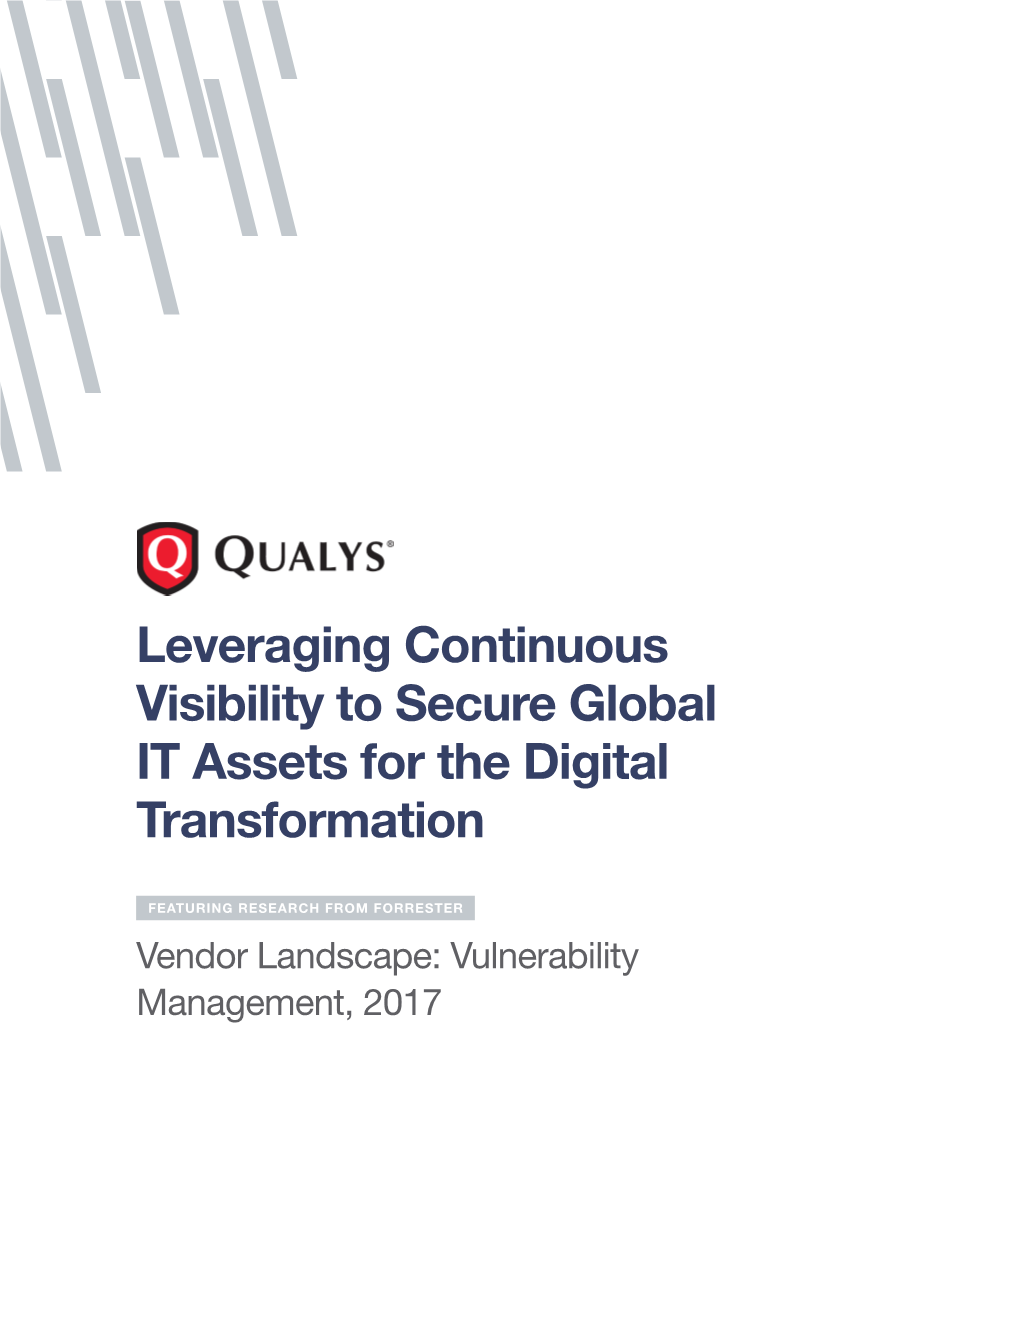 Leveraging Continuous Visibility to Secure Global IT Assets for the Digital Transformation